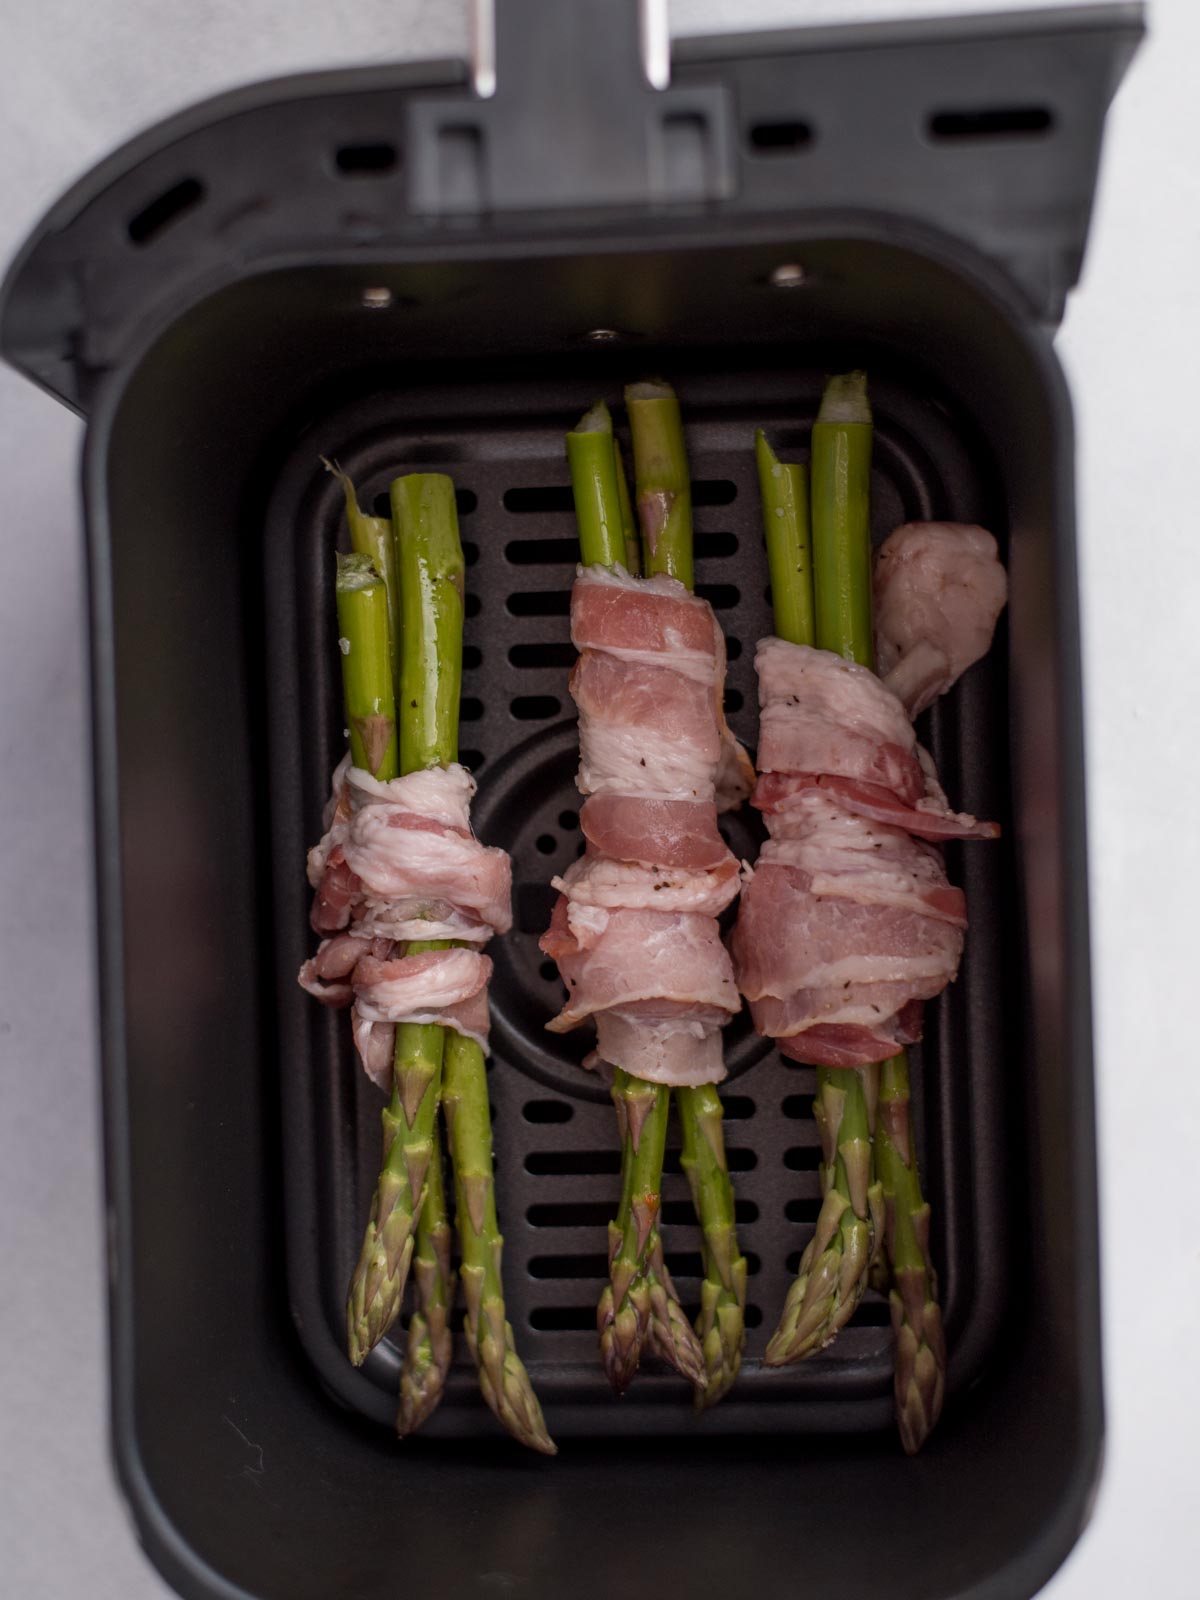 Seasoned asparagus wrapped in bacon and laying in an air fryer basket.